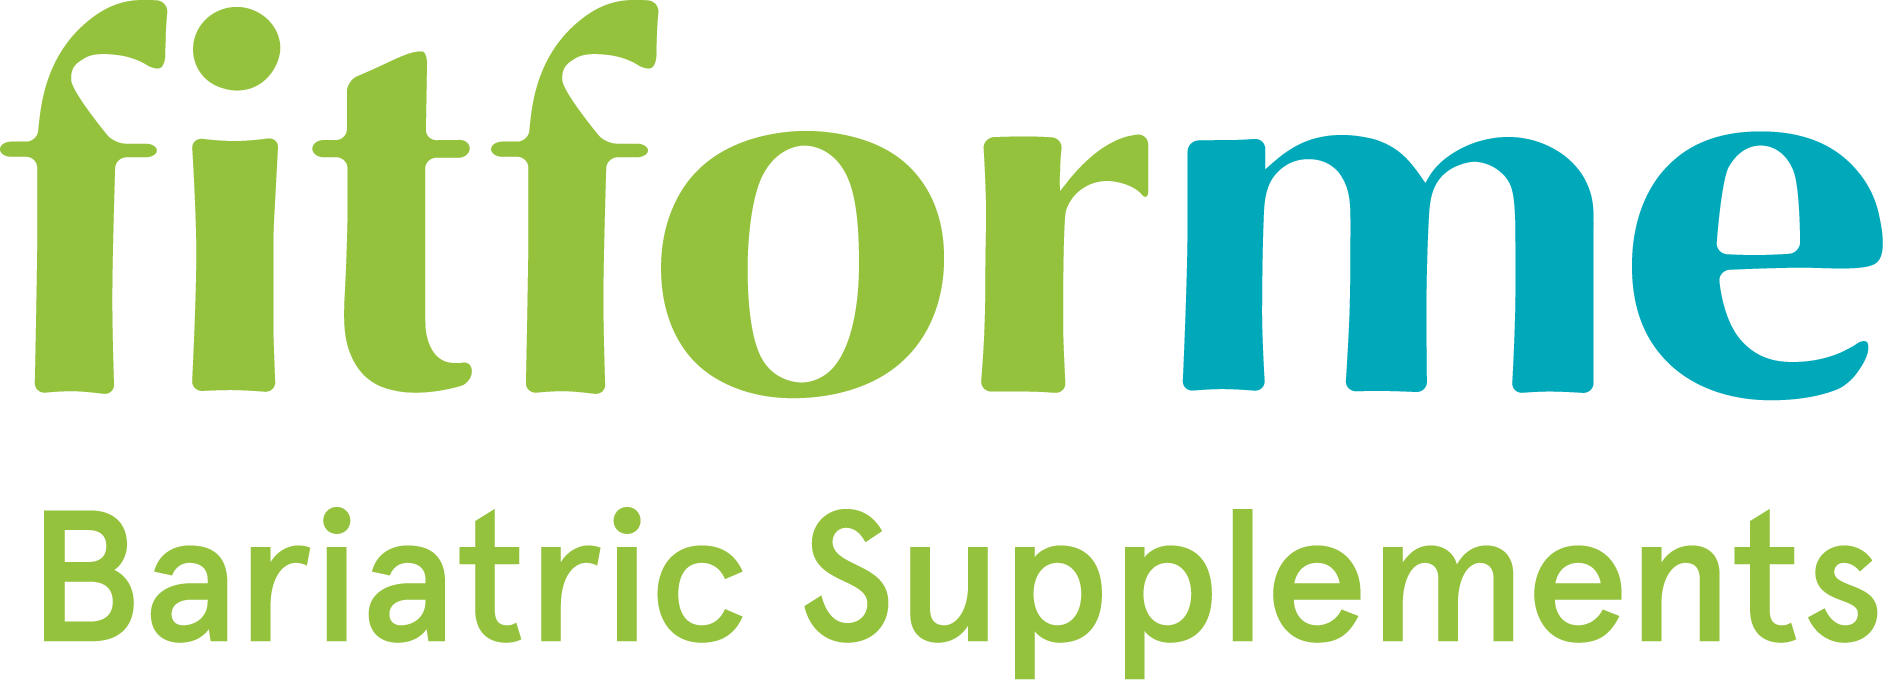 fitforme Bariatric Supplements